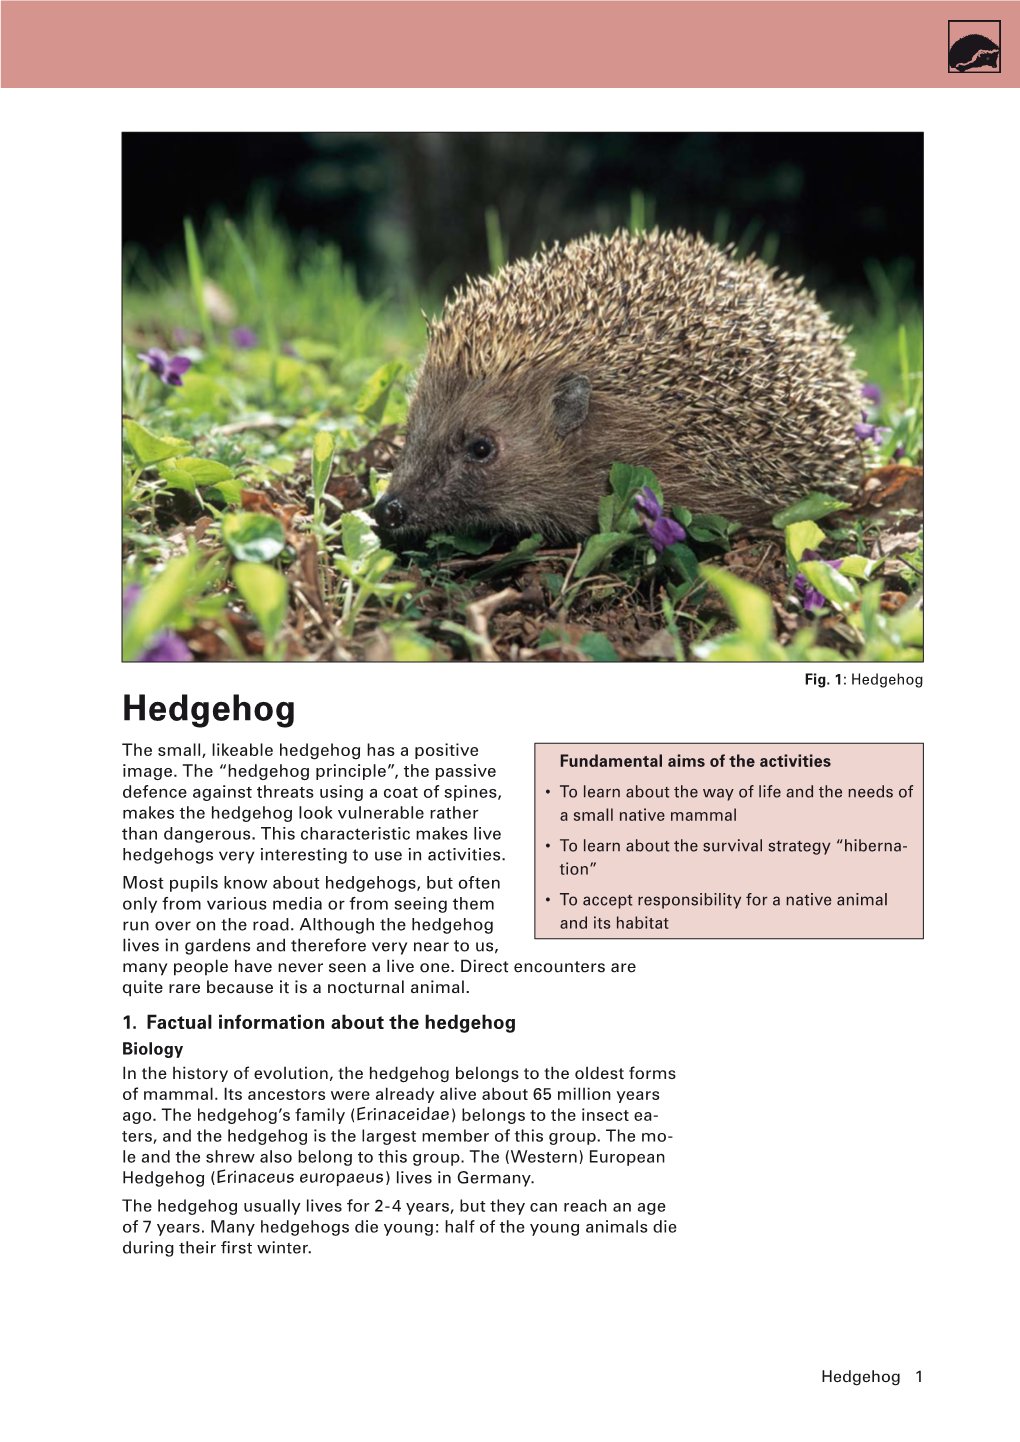 Hedgehog Hedgehog the Small, Likeable Hedgehog Has a Positive Fundamental Aims of the Activities Image